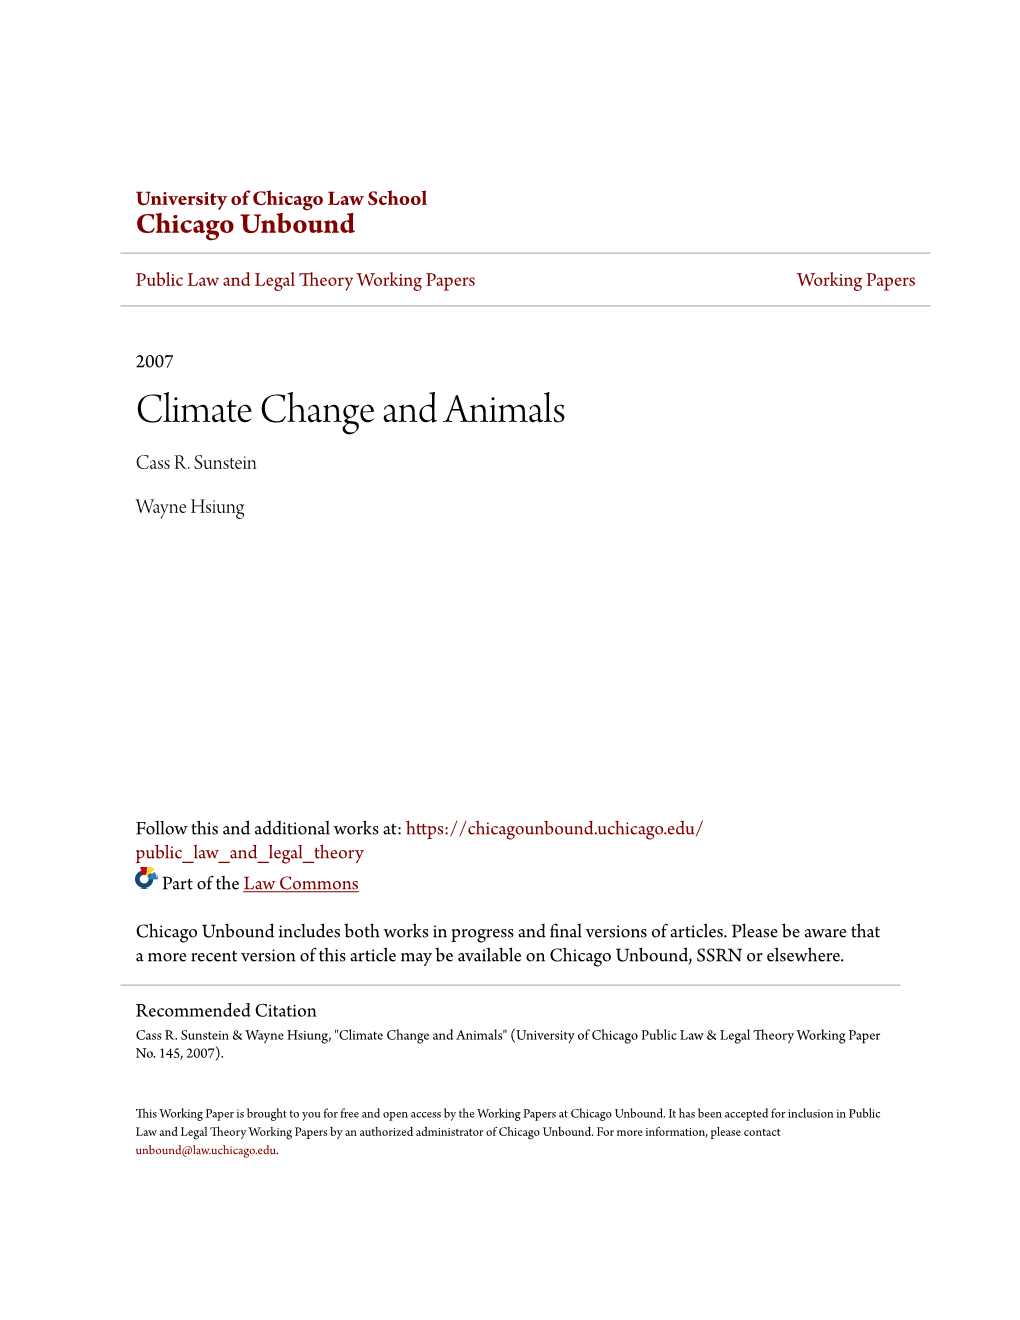 Climate Change and Animals Cass R